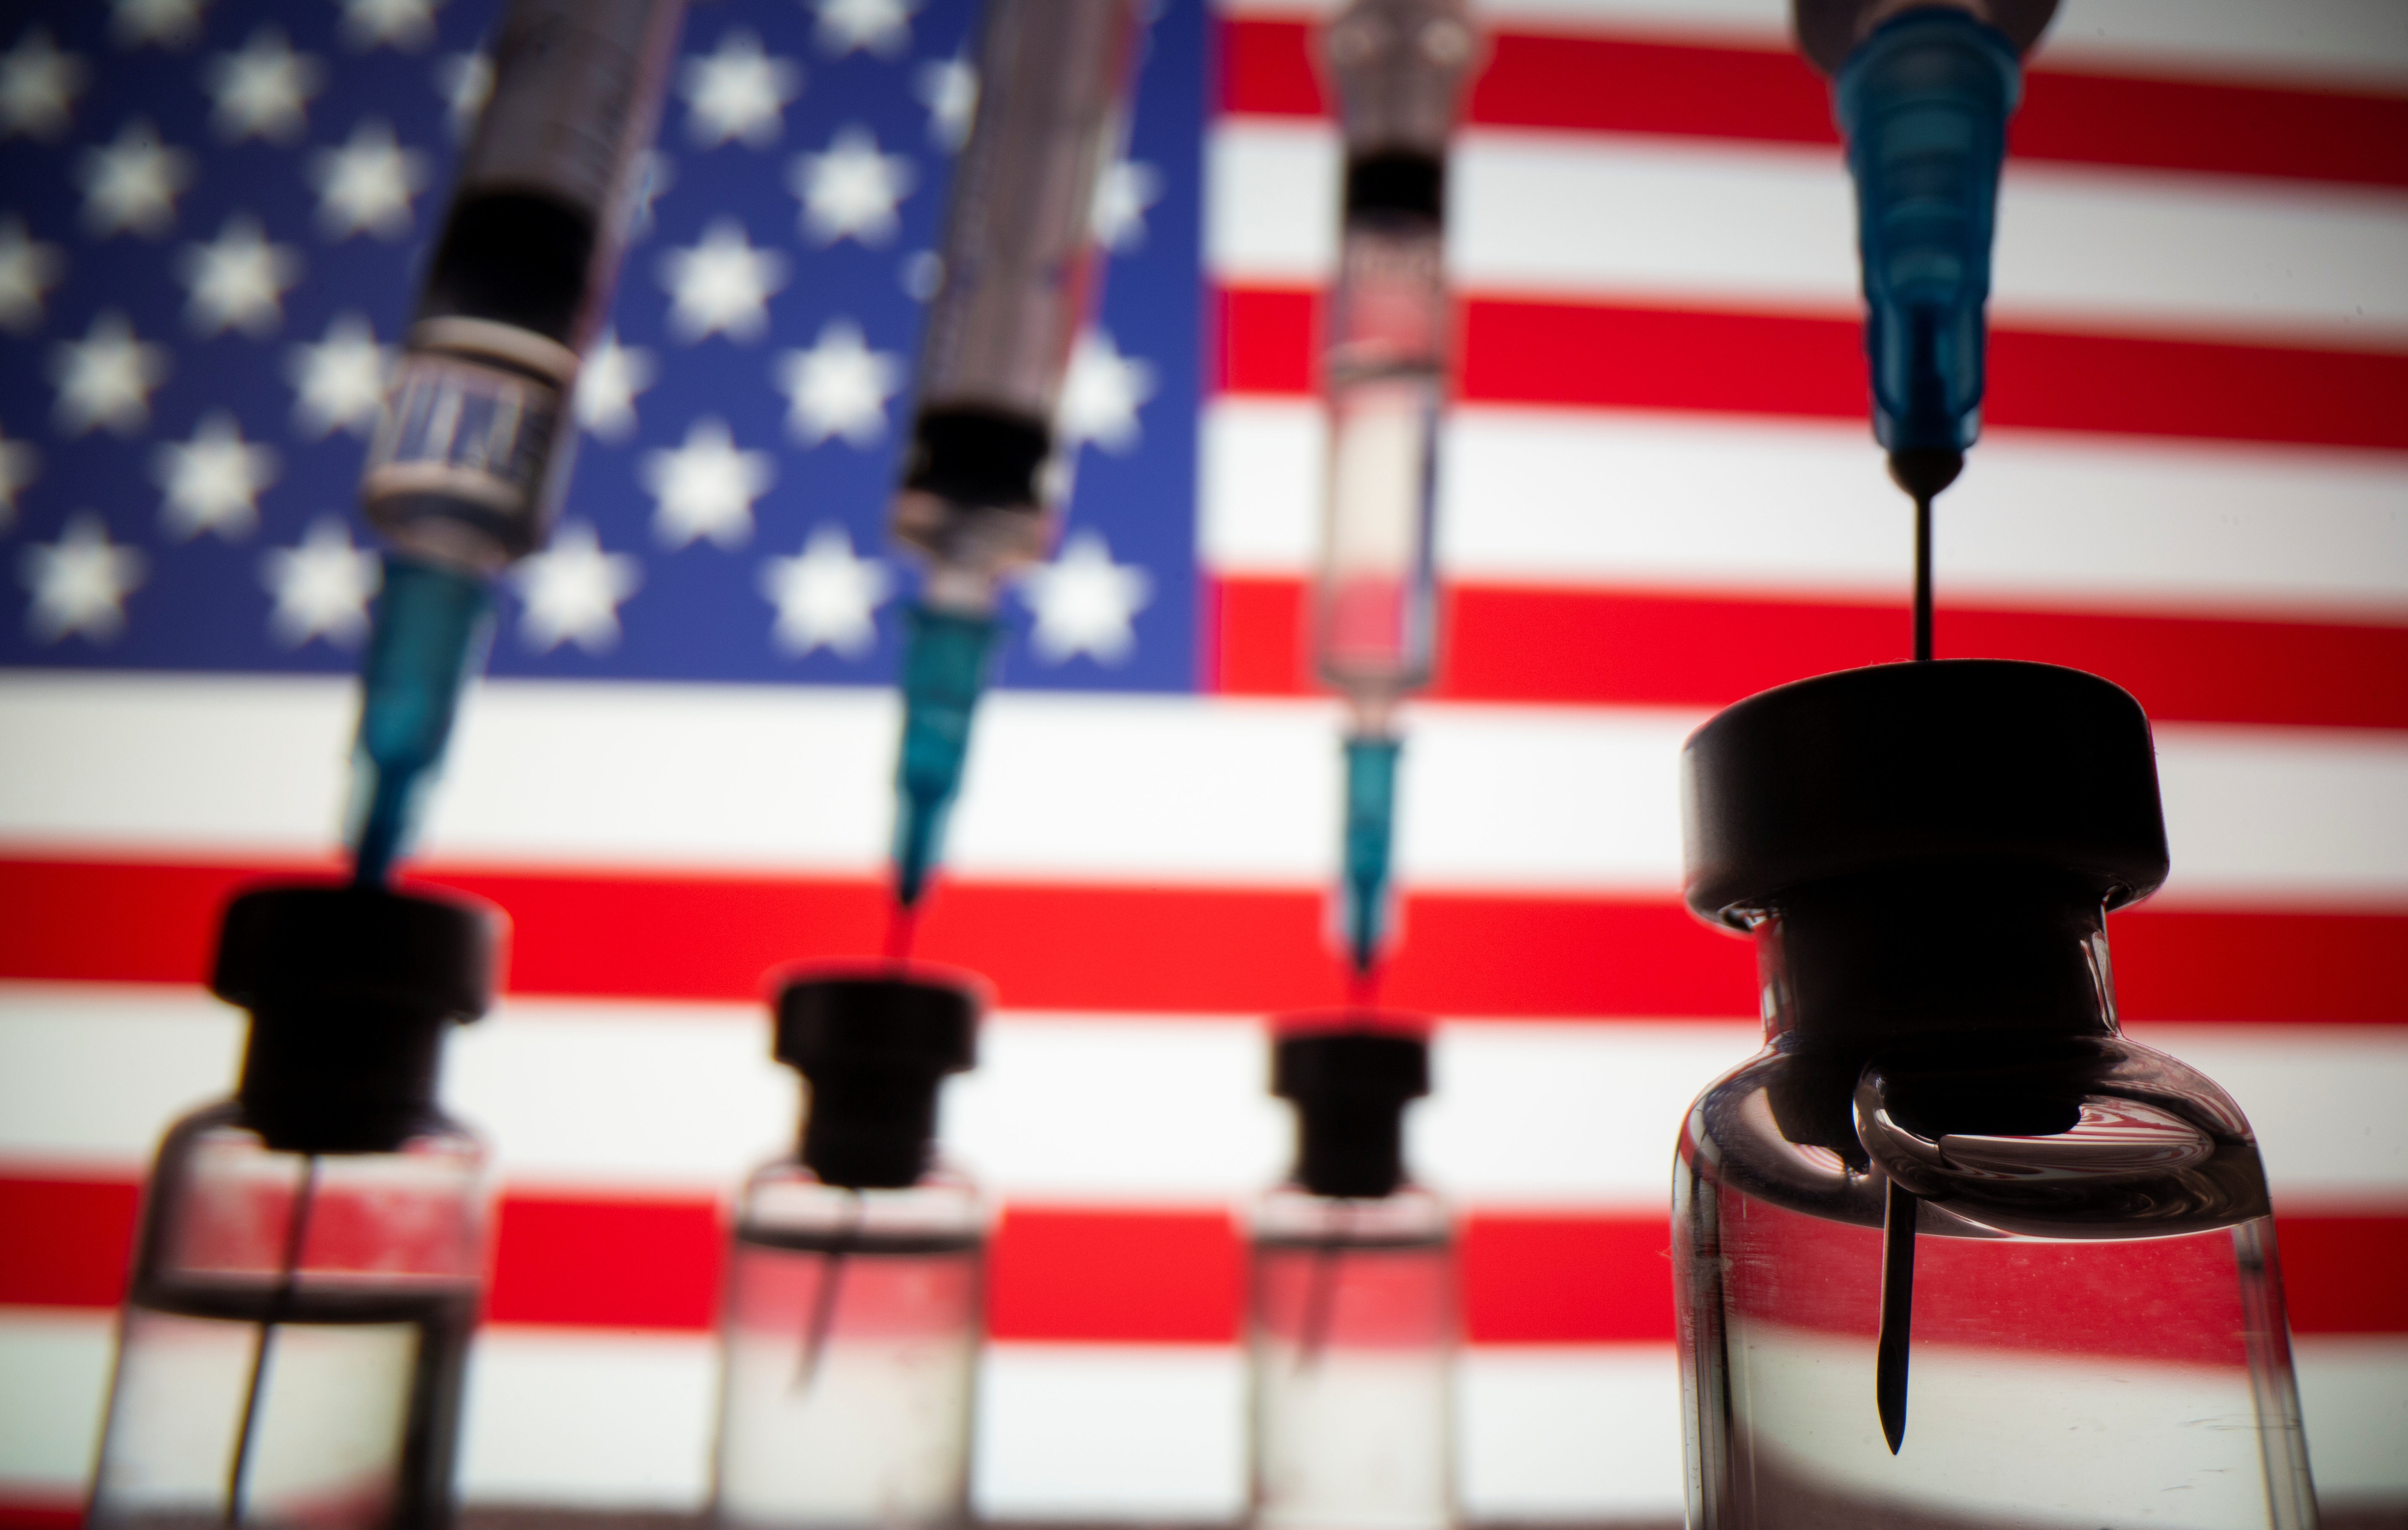 Vials and syringes are seen in front of displayed U.S. flag in this illustration photo